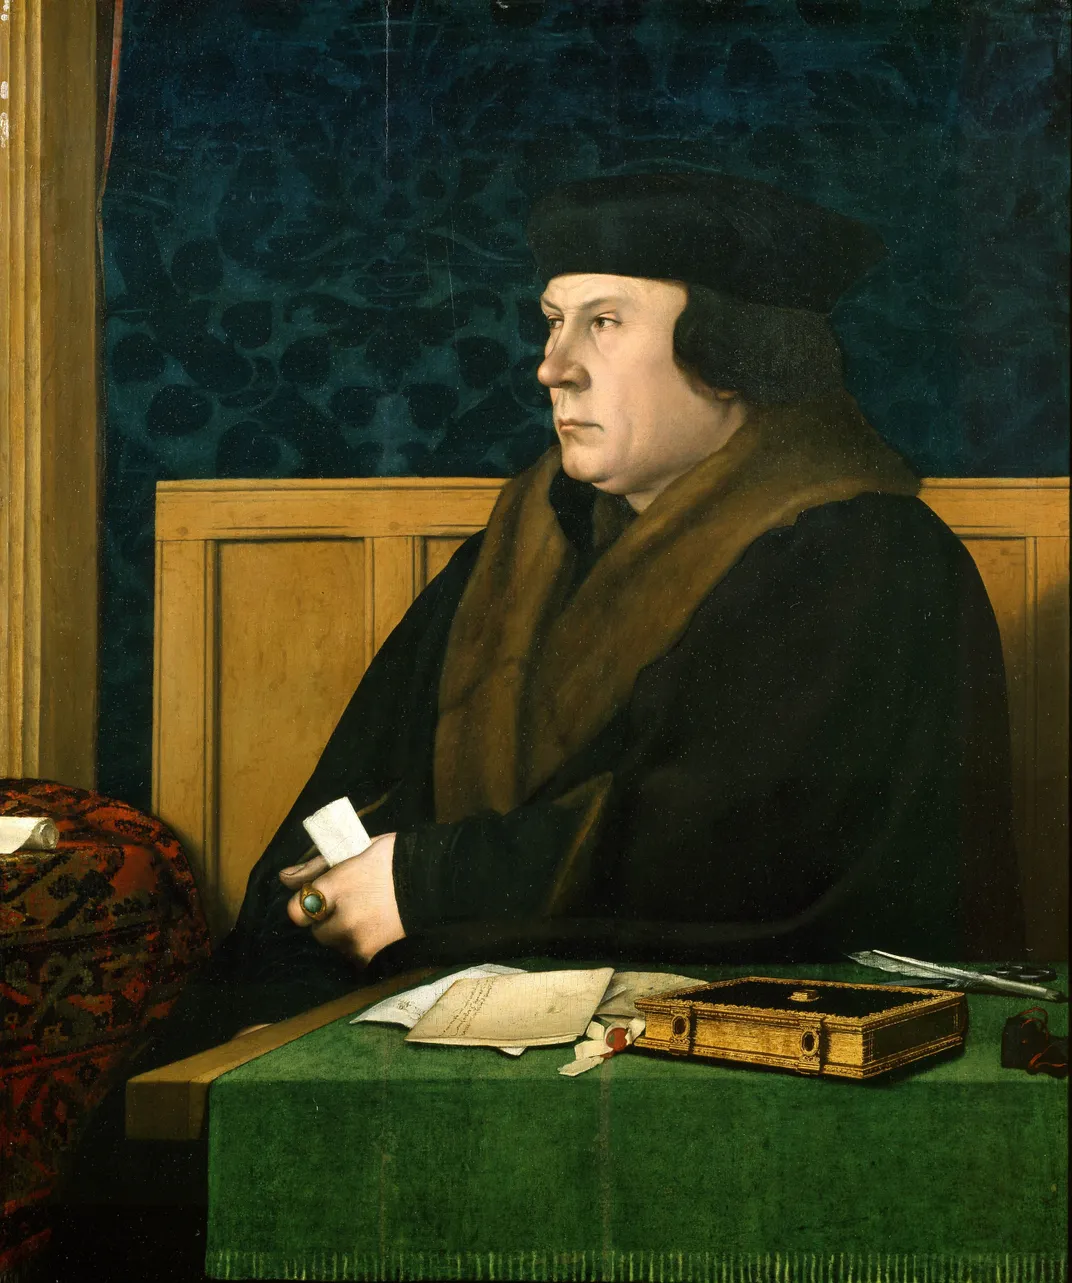 Hans Holbein's famous portrait of Thomas Cromwell